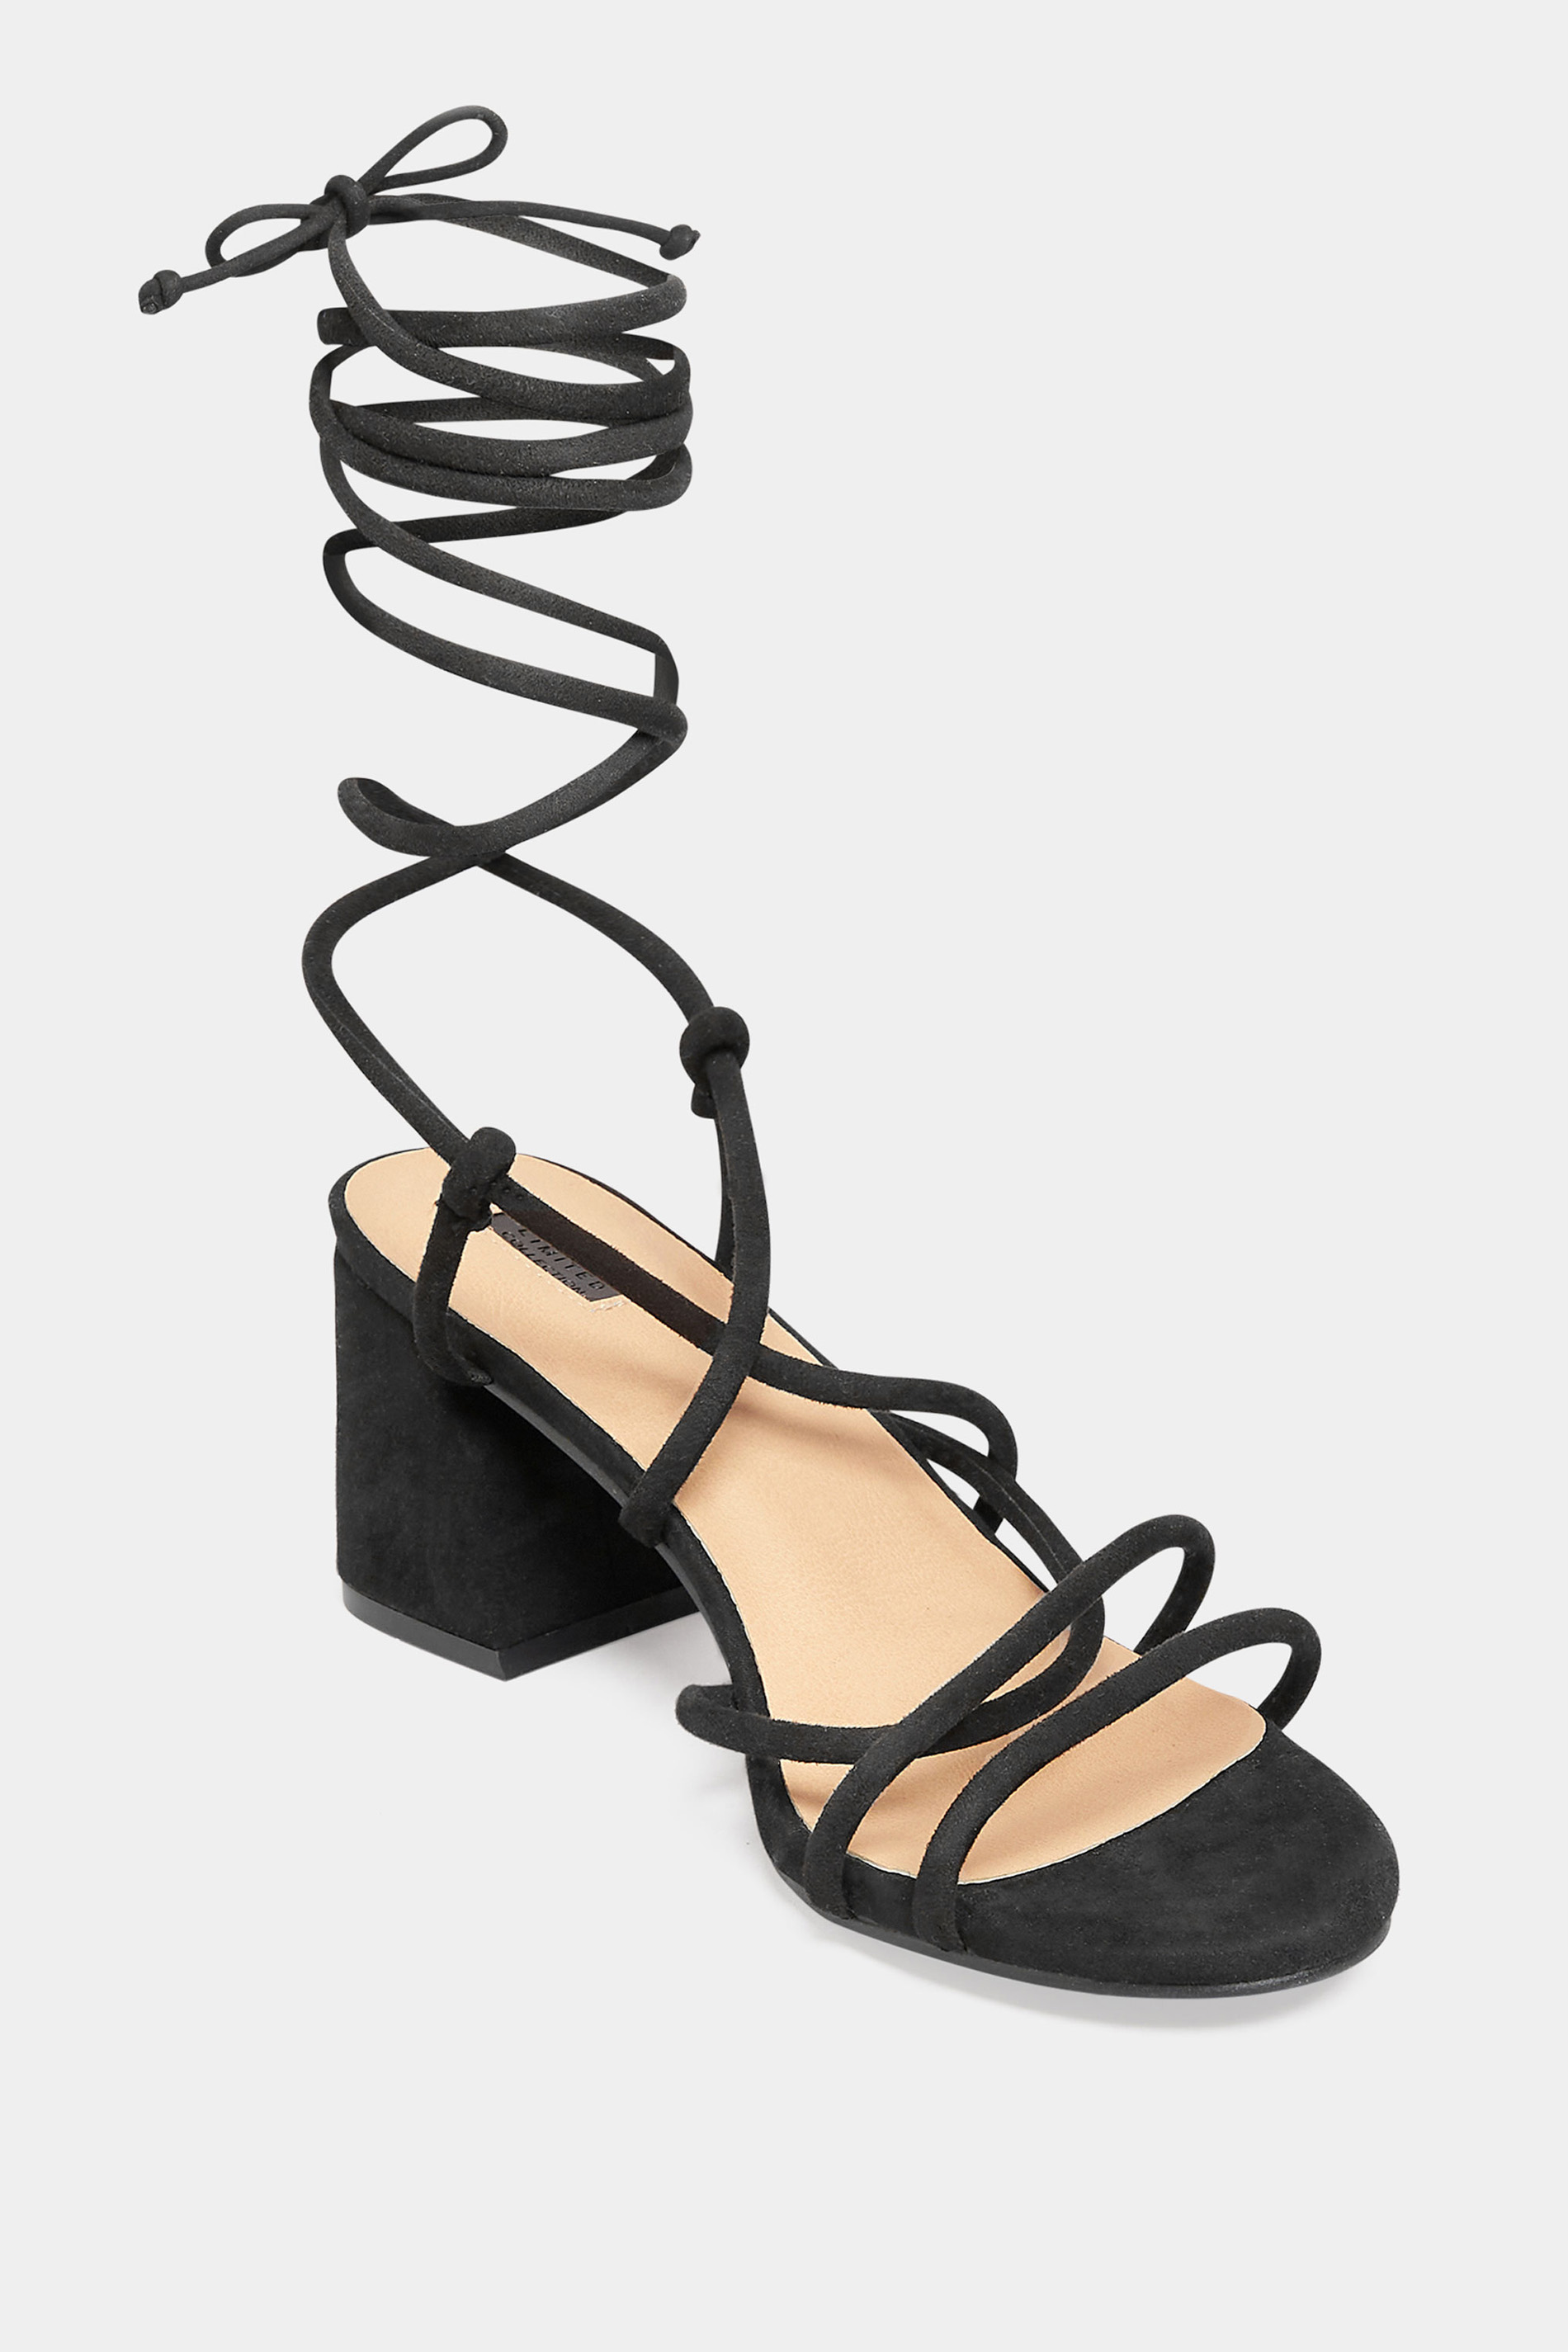 LIMITED COLLECTION Black Lace Up Block Heels In Extra Wide Fit | Yours London 2